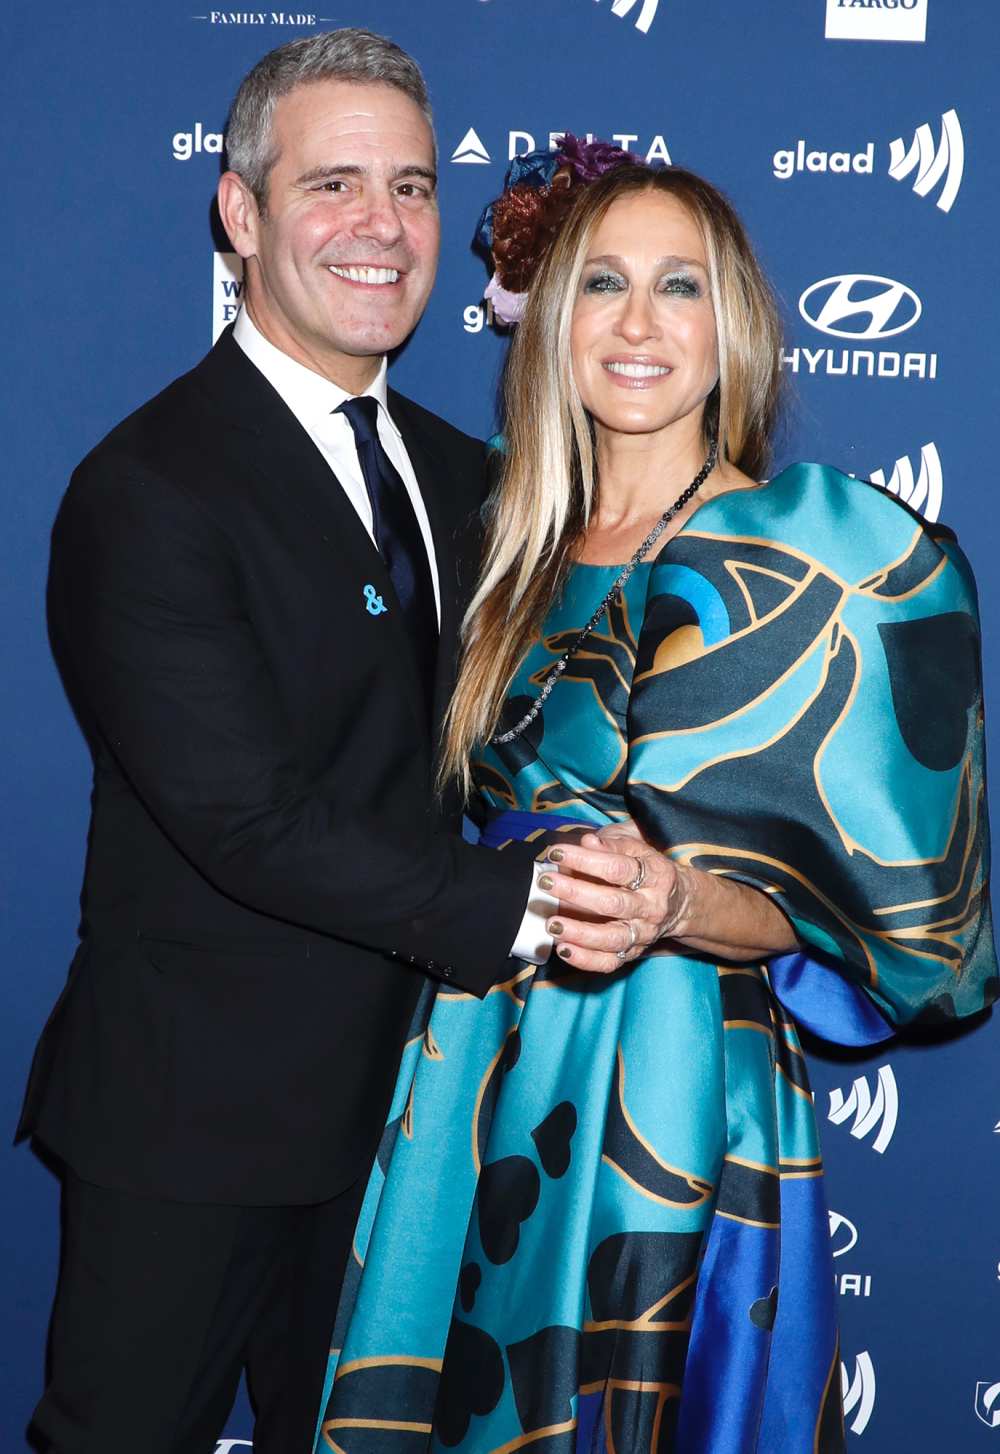 Andy Cohen Defends Sarah Jessica Parker for Calling Out Ageist Critics: ‘She Was So Right’